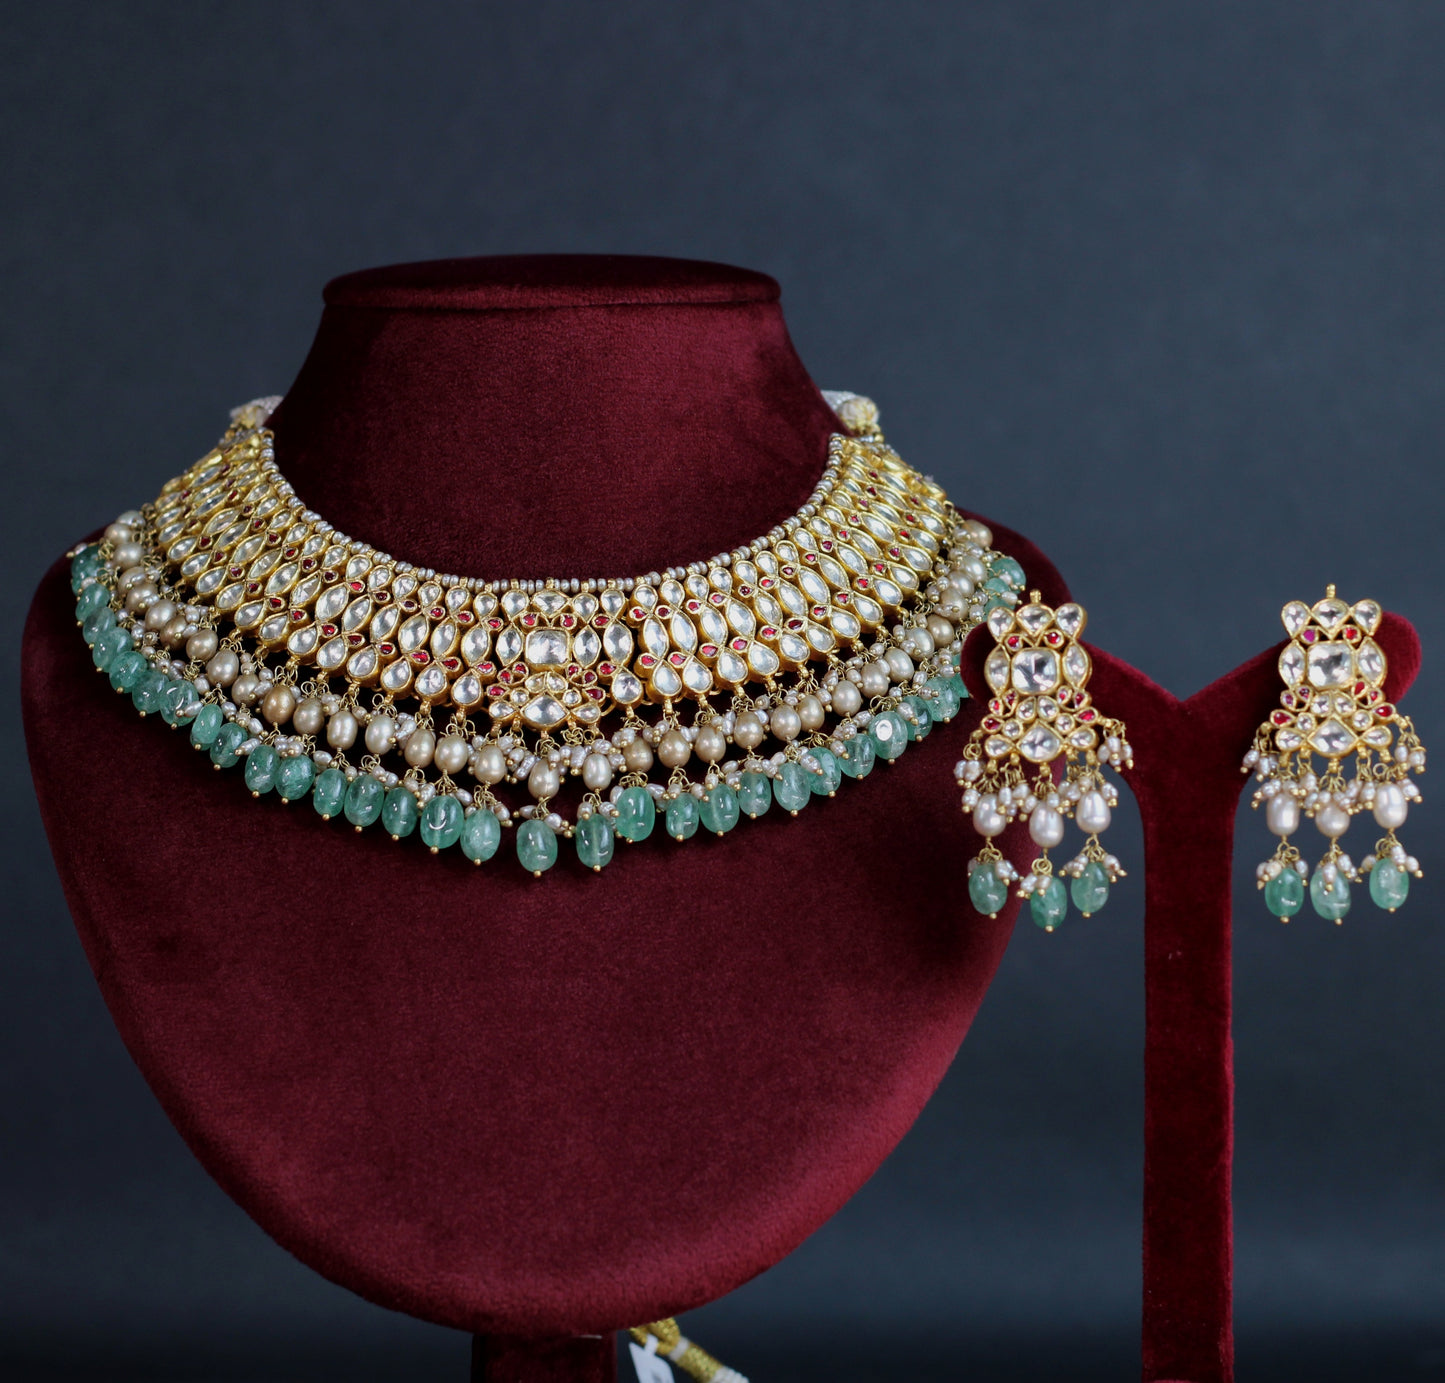 NECKLACE AND EARRING IN 92.5 STERLING SILVER WITH 18KT GOLD PLATED KUNDAN,fluorite,CULTURE PEARLS,FRESH WATER PEARLS